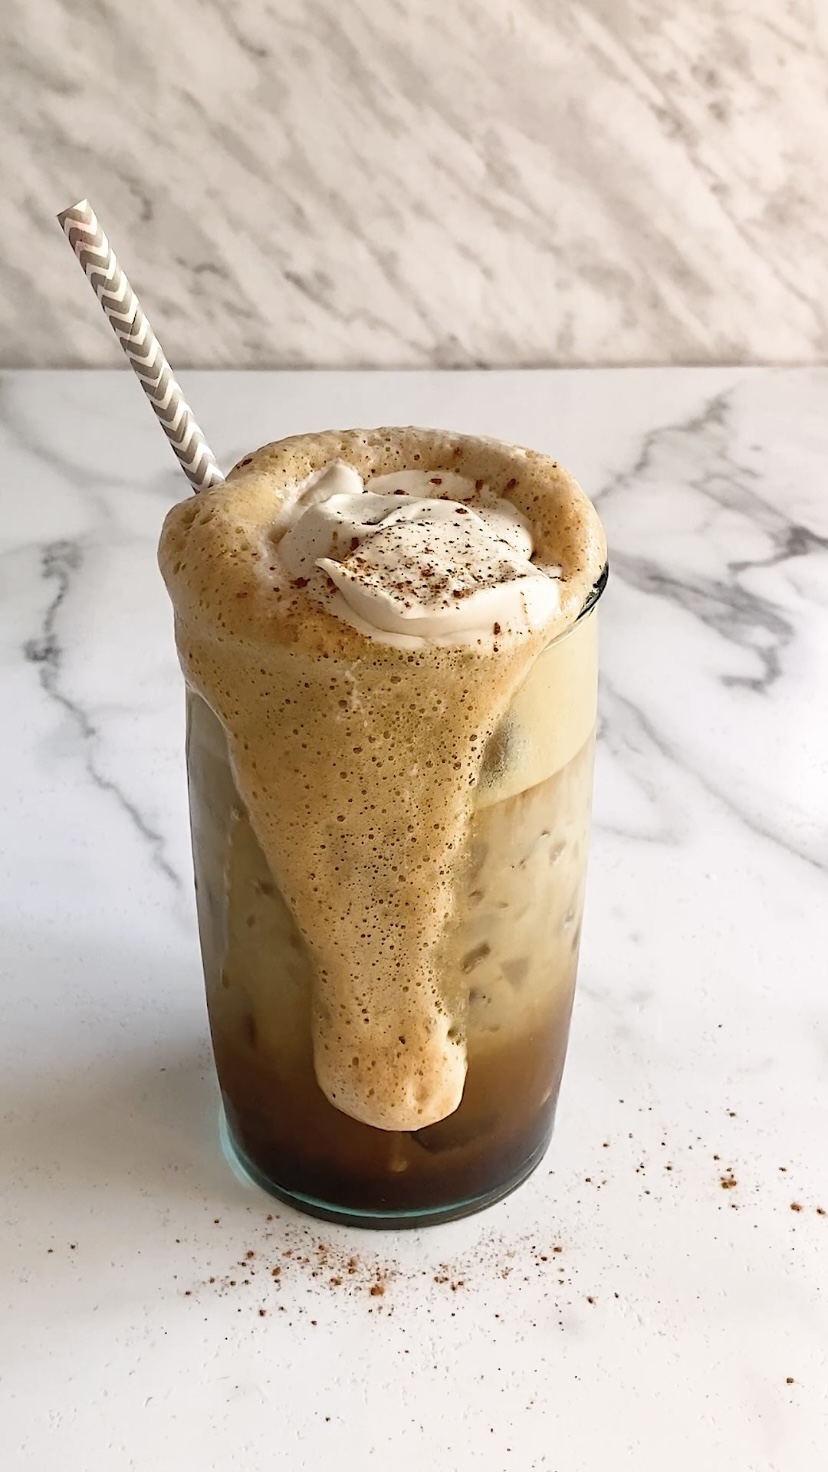 An iced coffee in a glass with whipped topping on top and cinnamon.